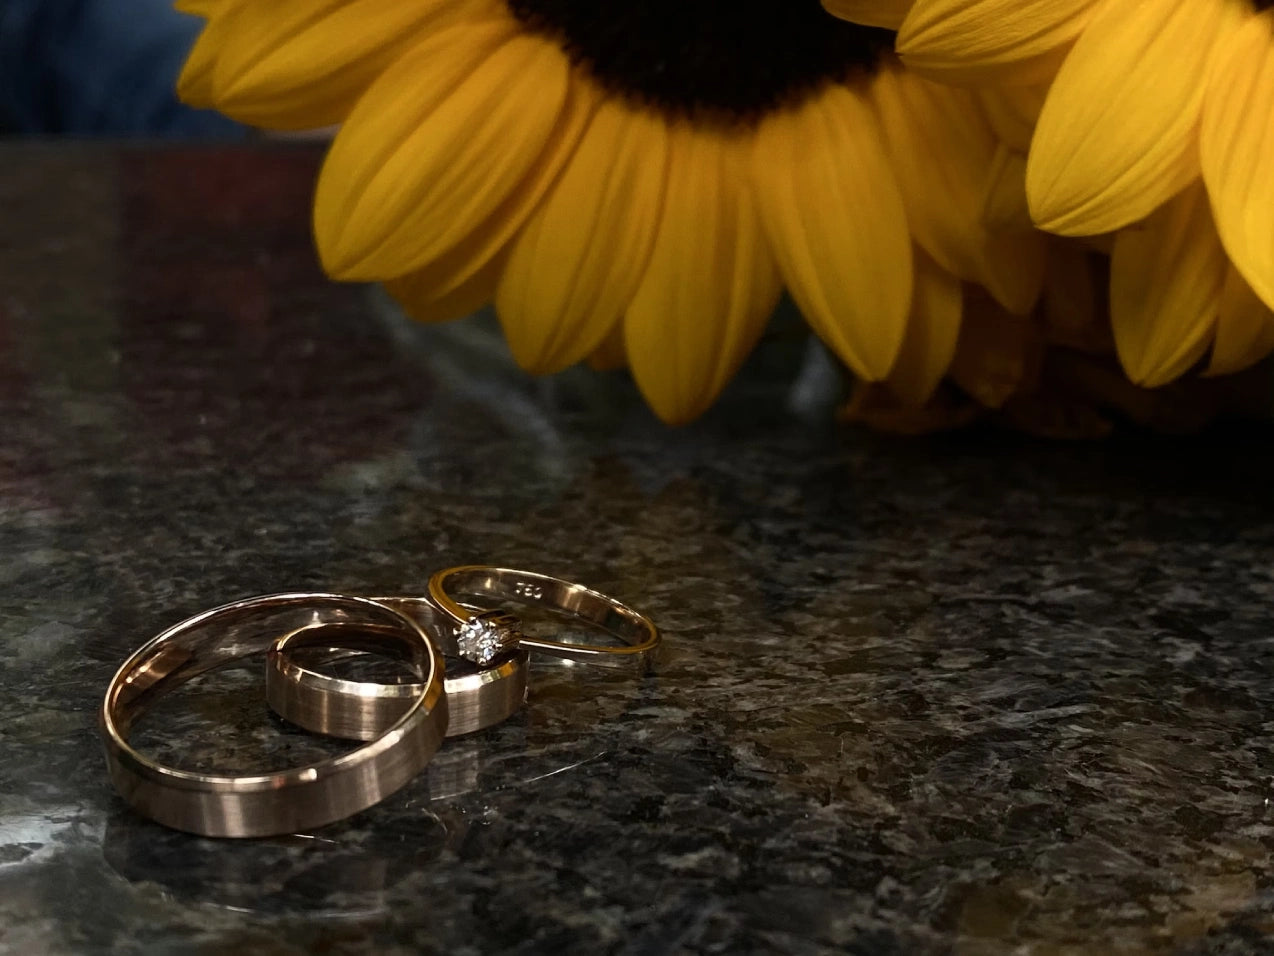 An engagement rings placed on the floor with some yellow flowers